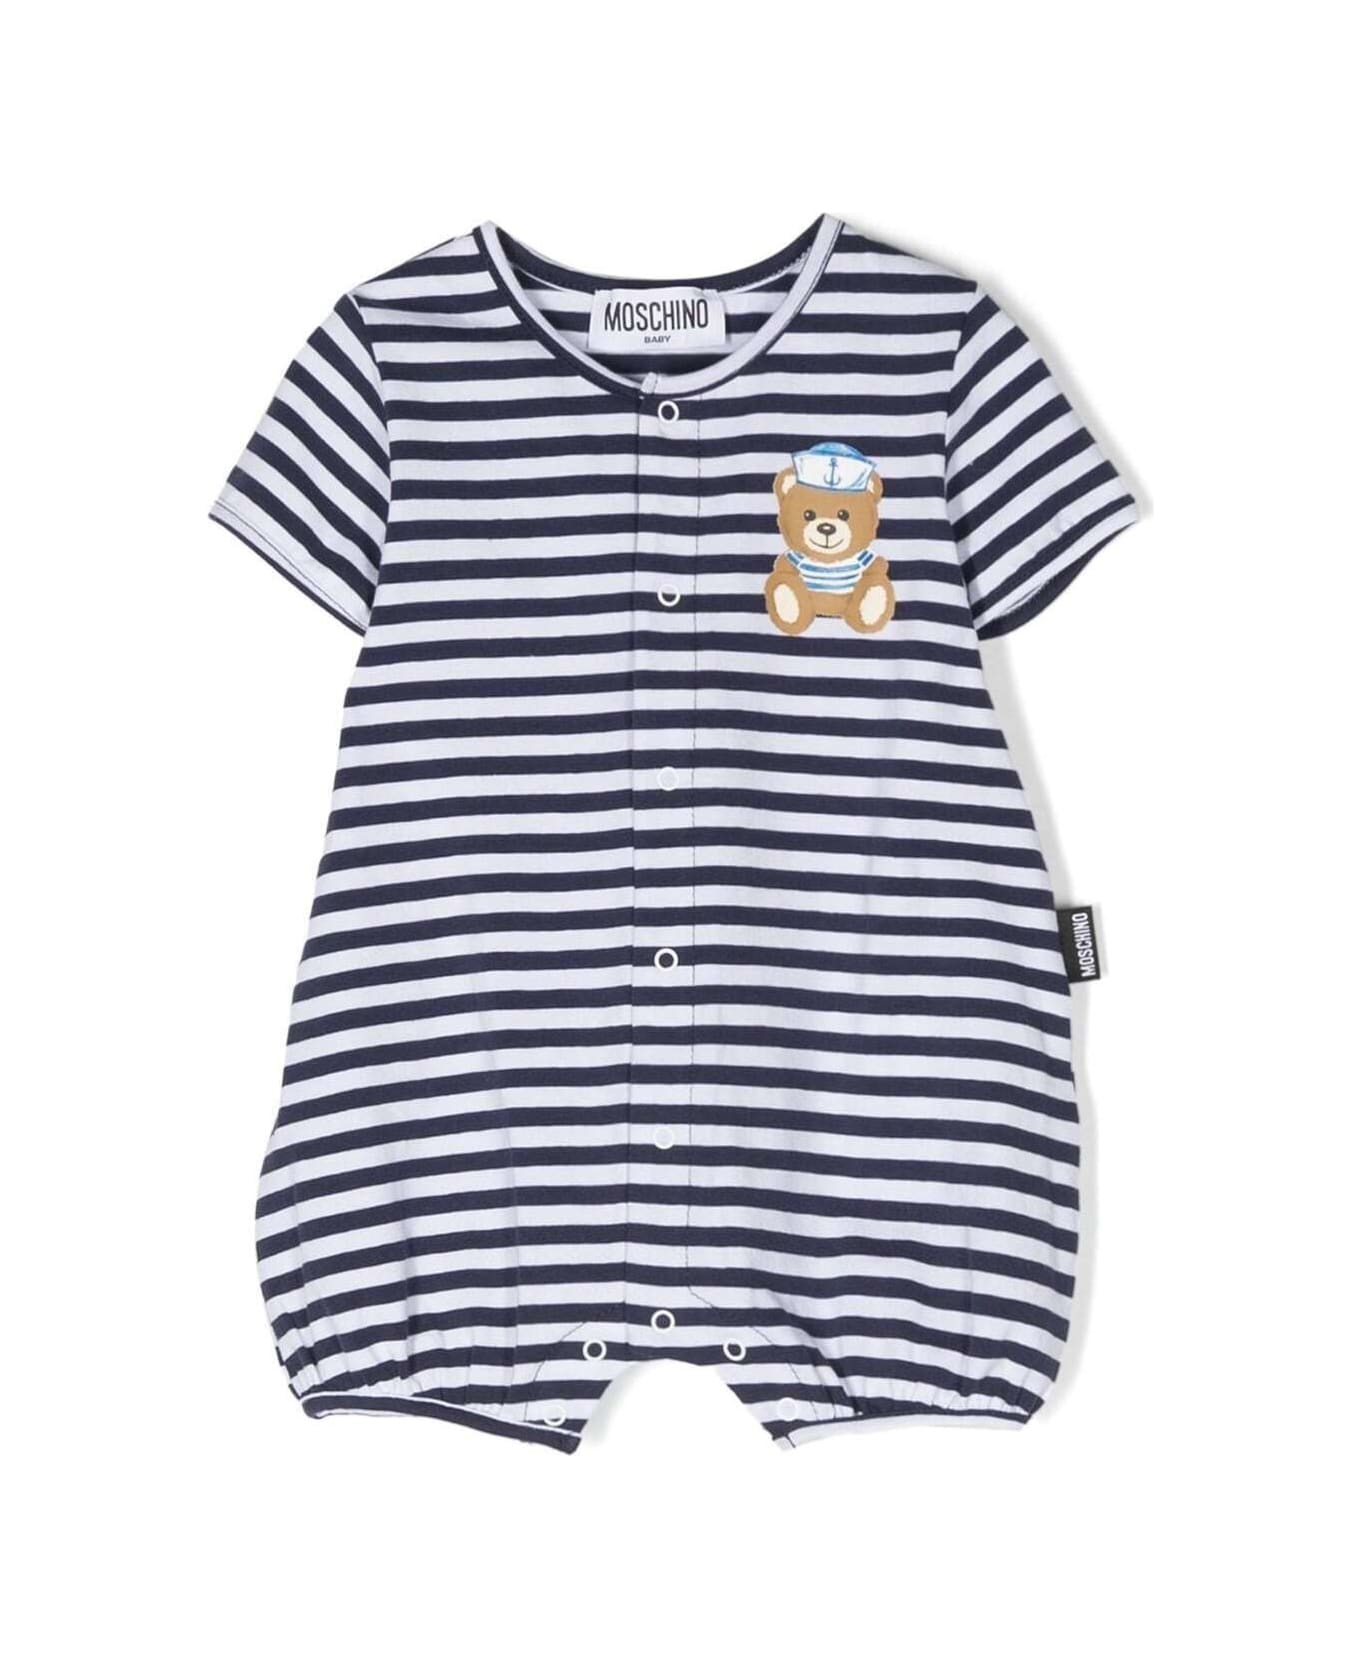 Moschino Stripe Print Romper With Teddy Bear In White Cotton Baby - Multicolor